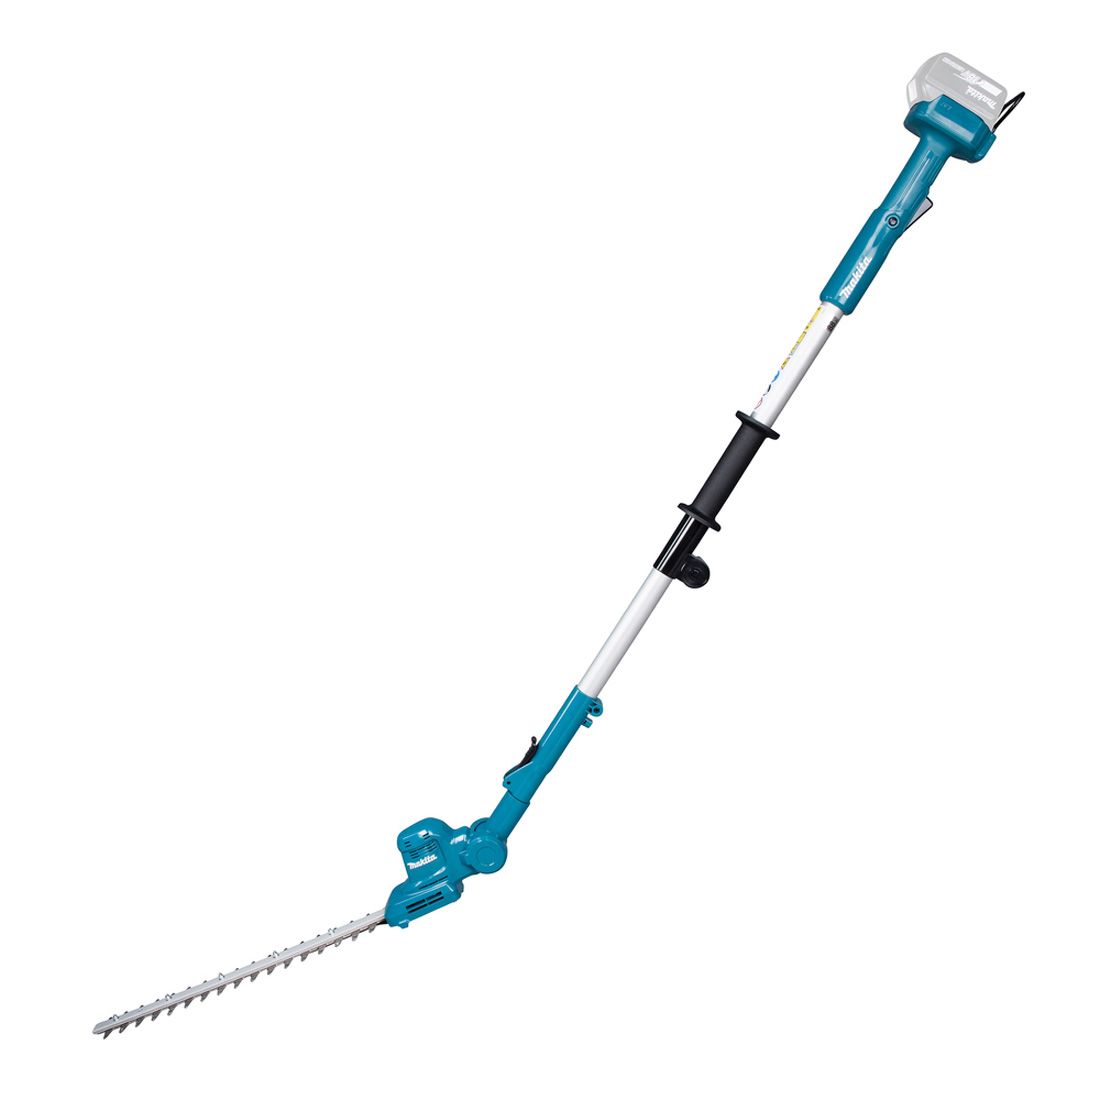 Makita DUN461WZ 18V LXT Pole Hedge Trimmer - Body Only